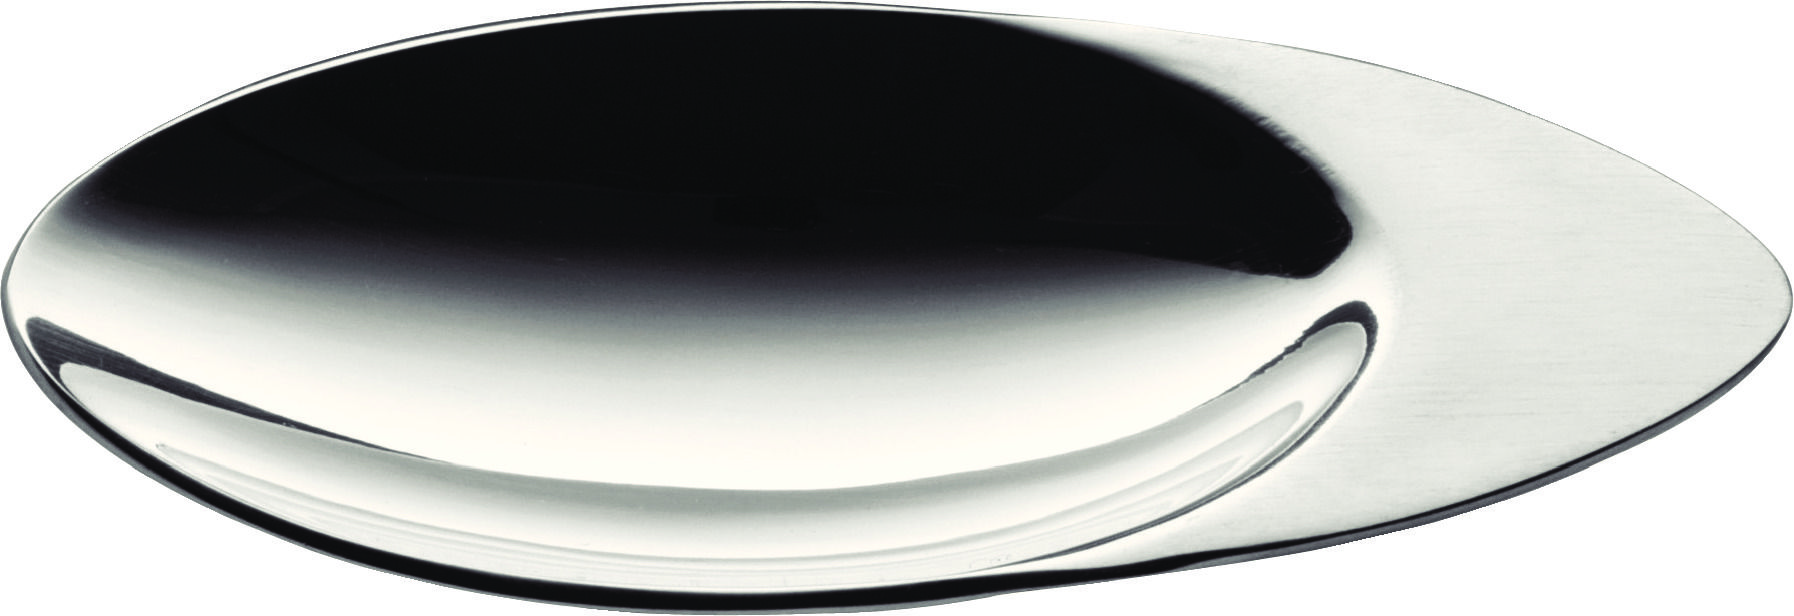 Appetize Tapas Spoon - F31019-000000-B01012 (Pack of 12)